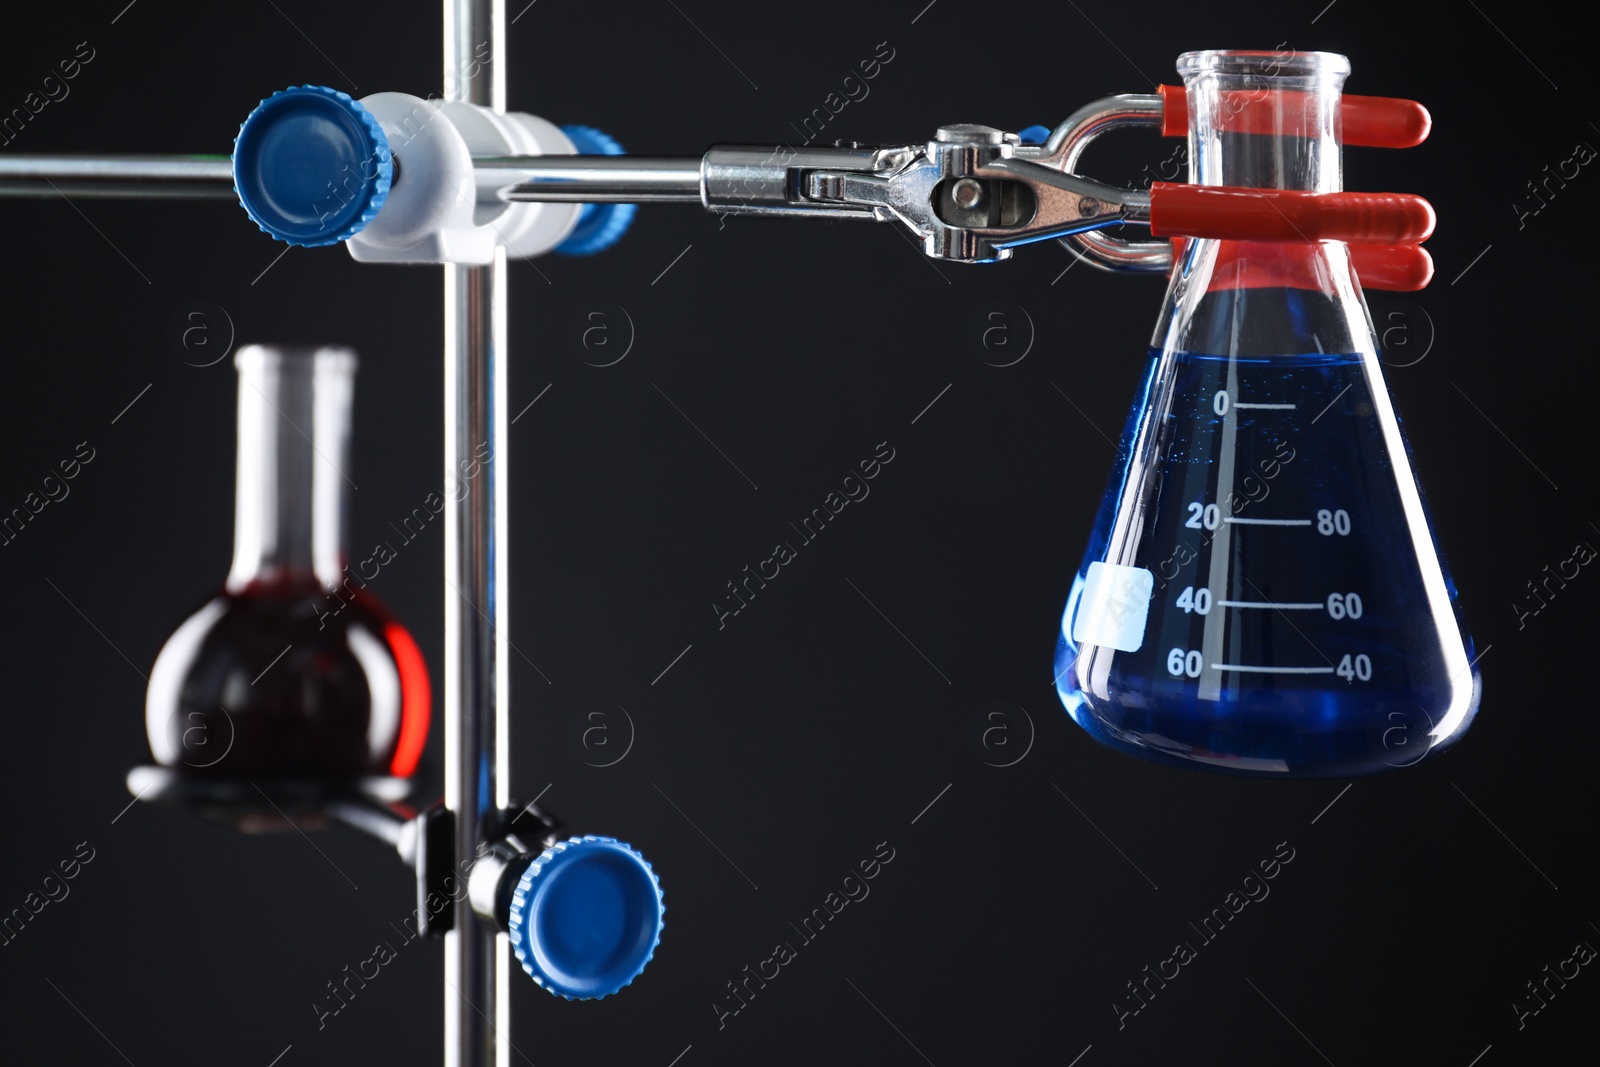 Photo of Retort stand and laboratory flasks with liquids on black background, selective focus